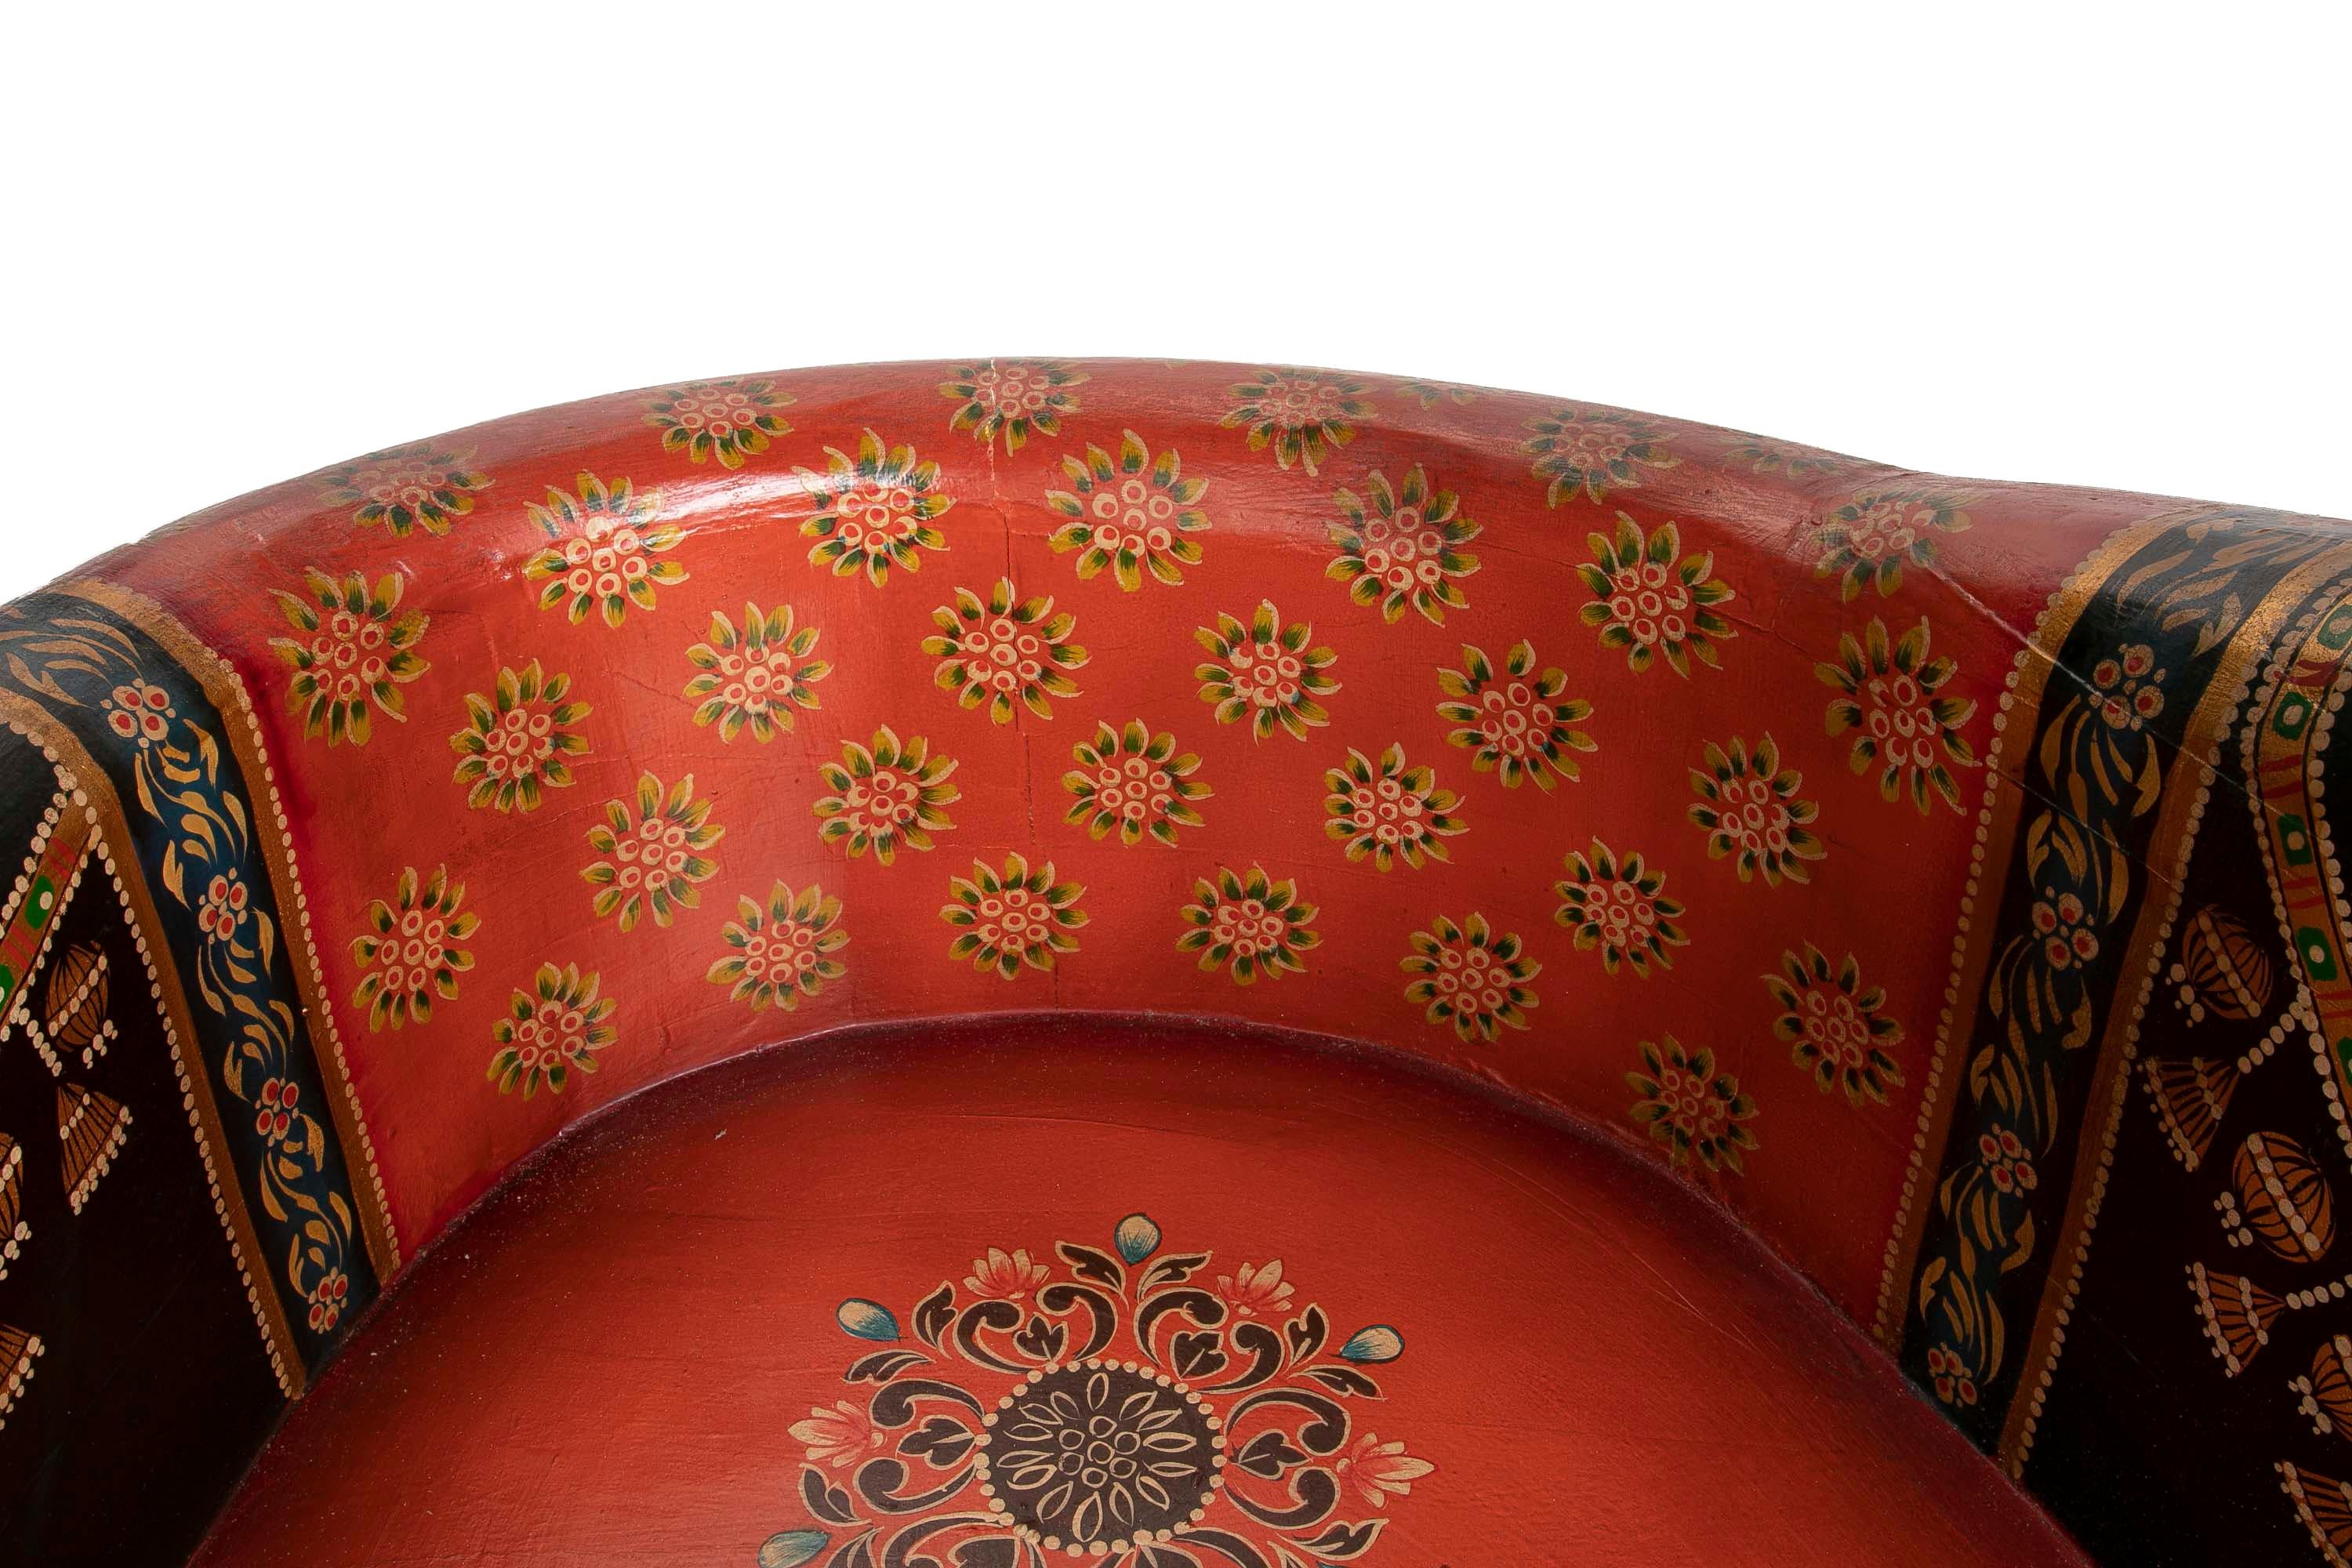 Hand-Carved and Hand-Painted Wooden Elephant Armchair For Sale 13